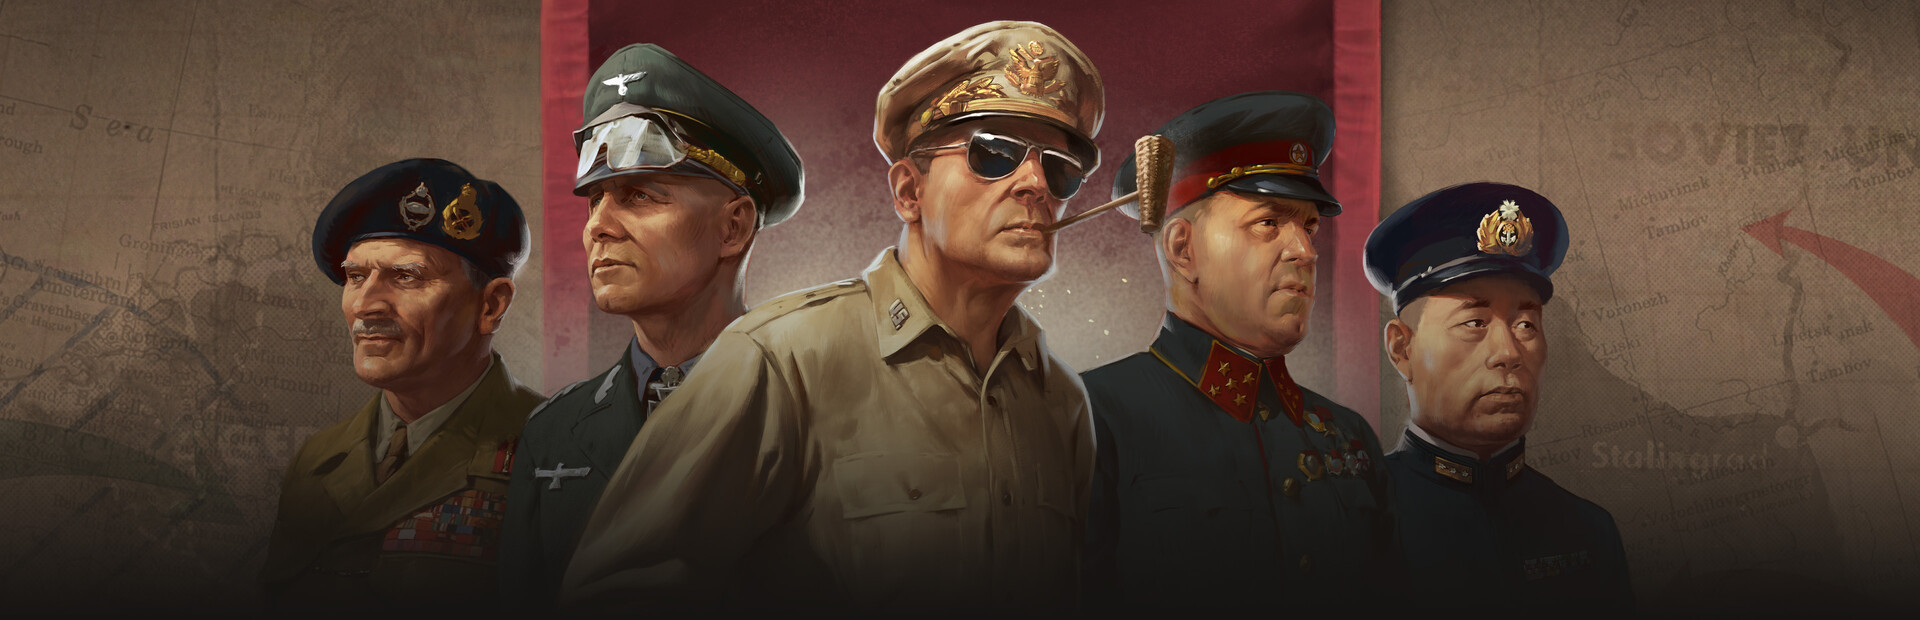 Hearts of Iron IV cover image